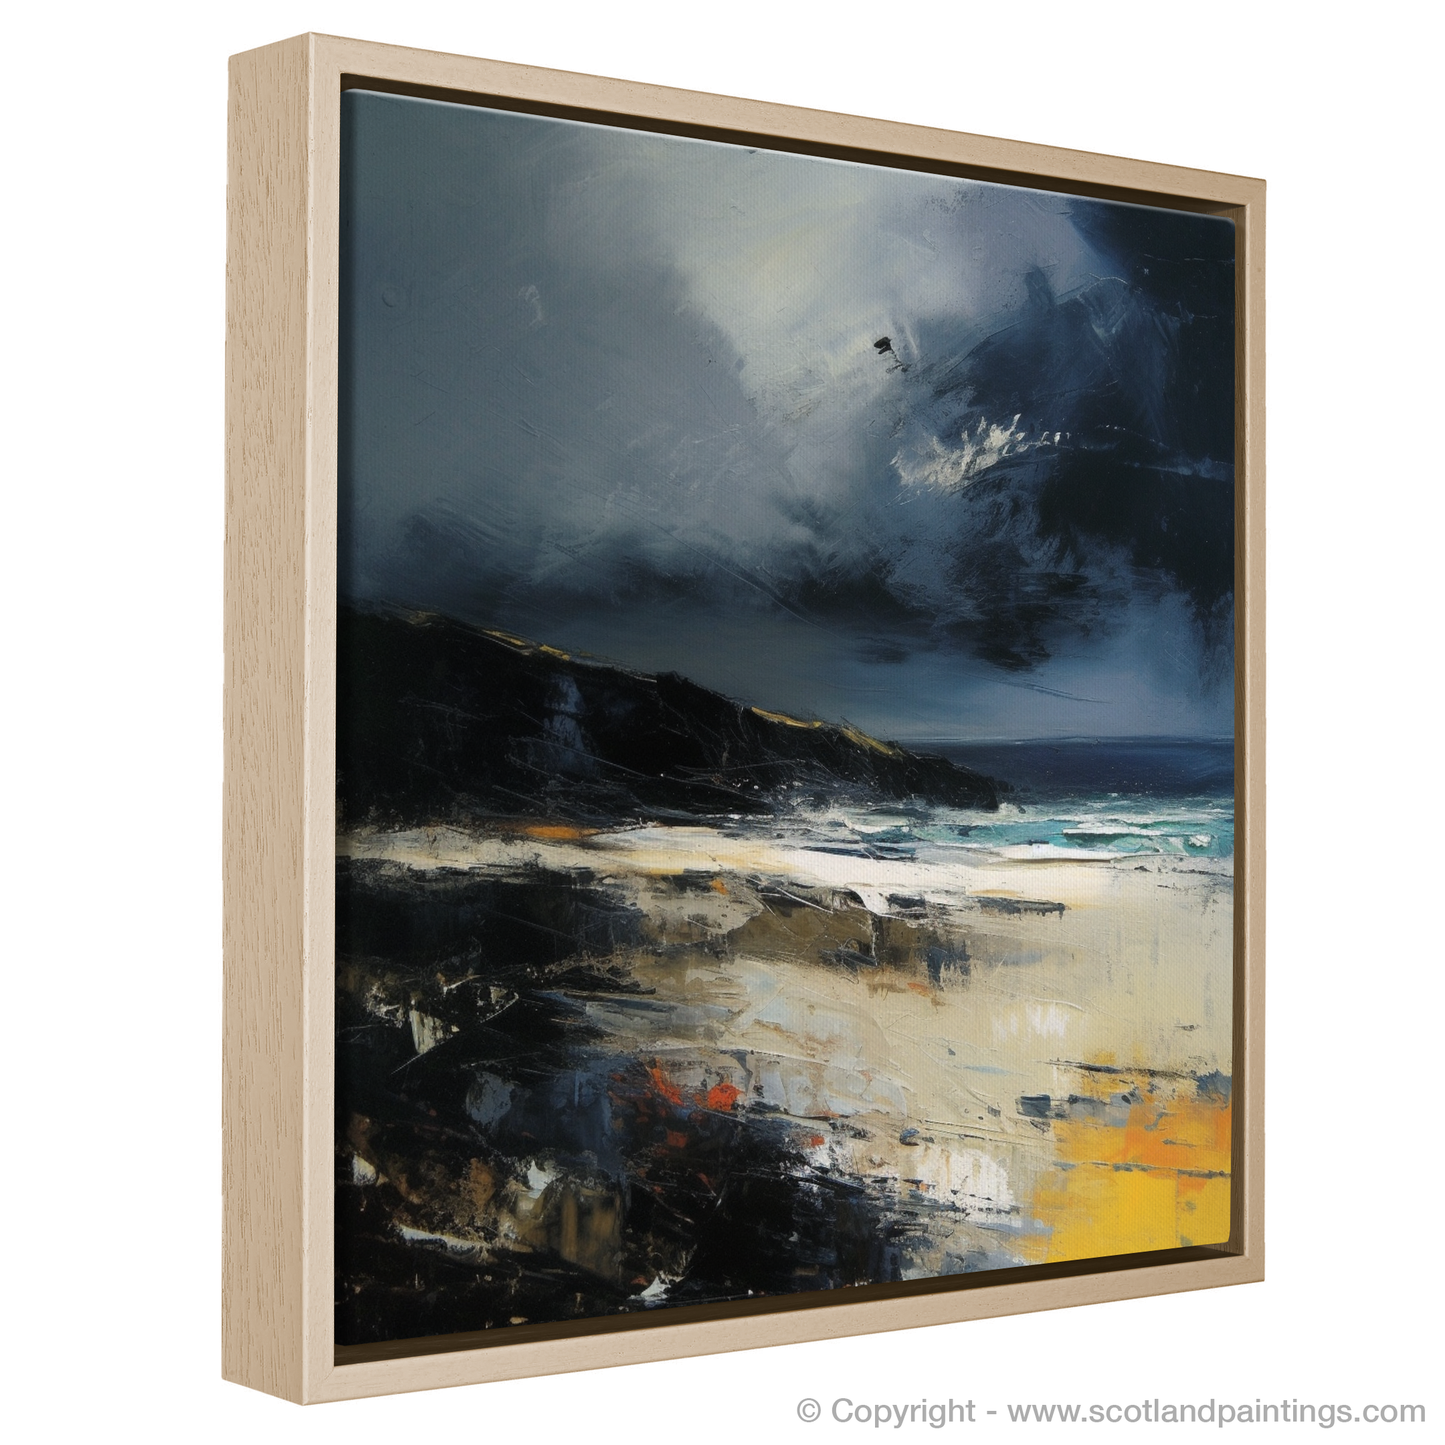 Storm's Embrace: The Power of Durness Beach